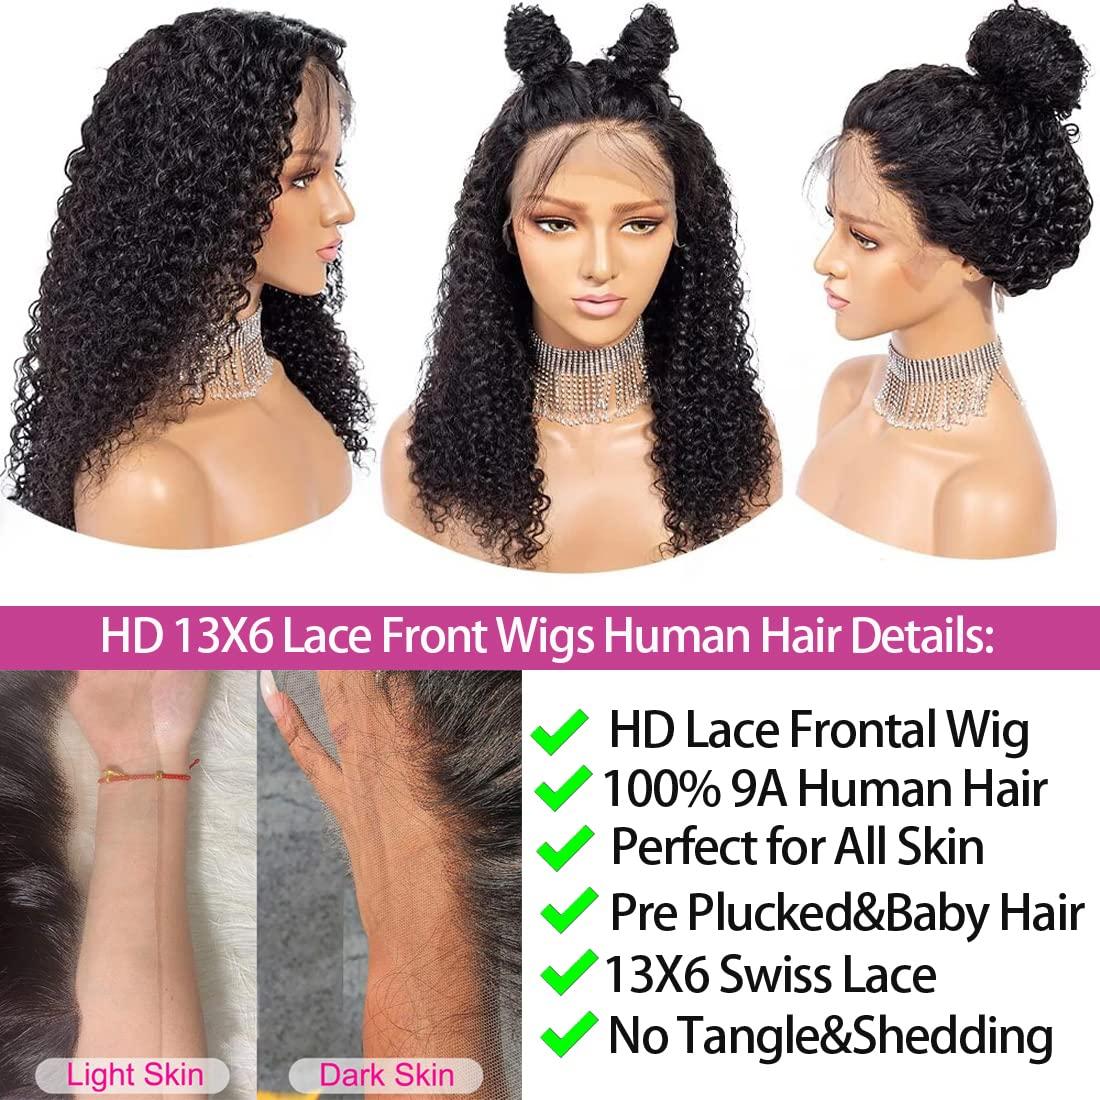 SYHGK 13x6 Deep Wave Lace Front Wigs Human Hair Wigs HD